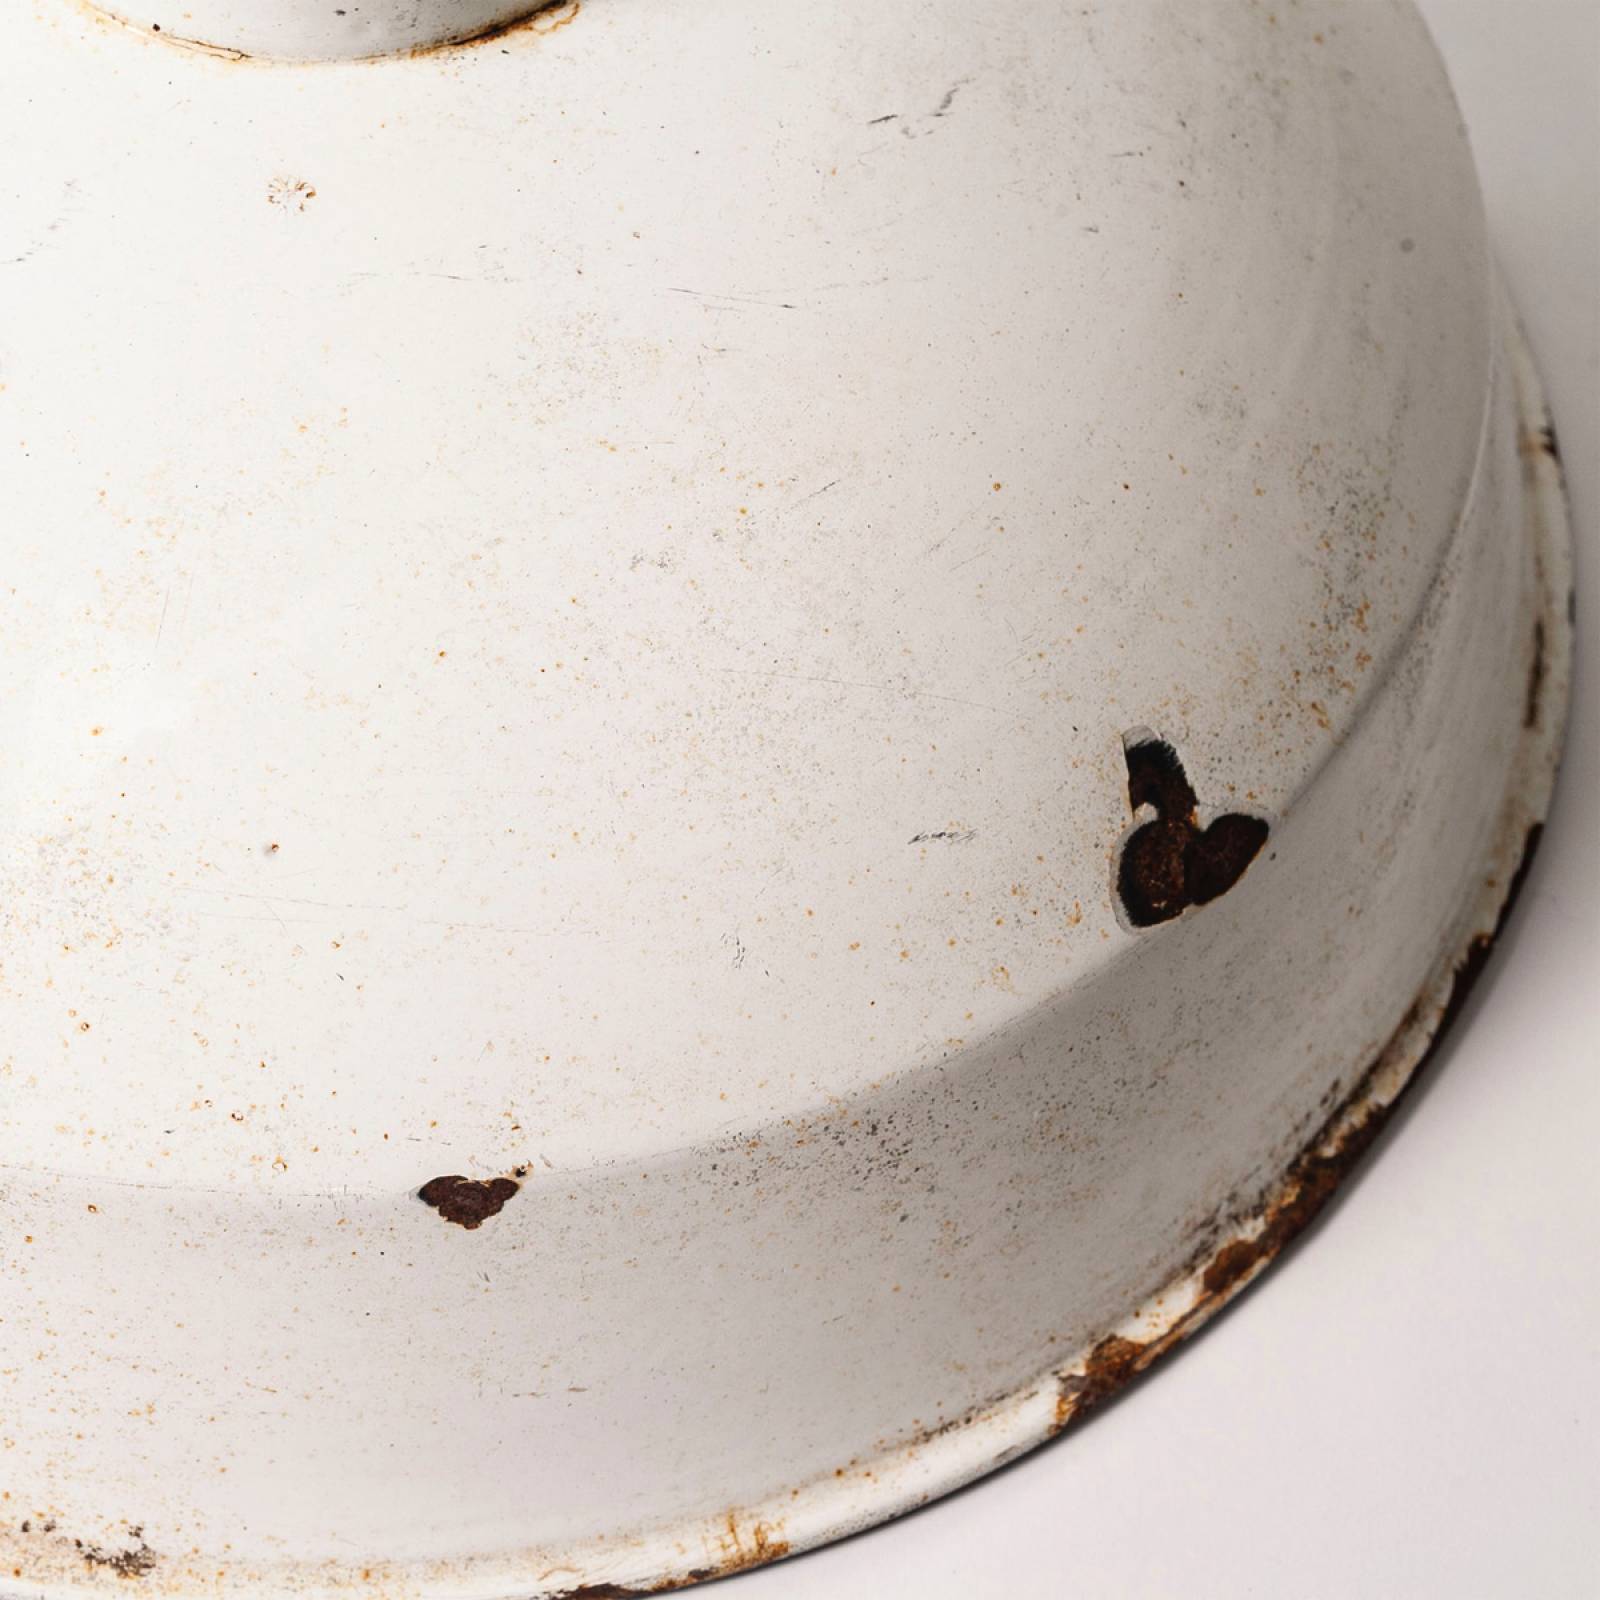 Vintage Metal and White Enamel Industrial Lampshade - 14 thumbnails